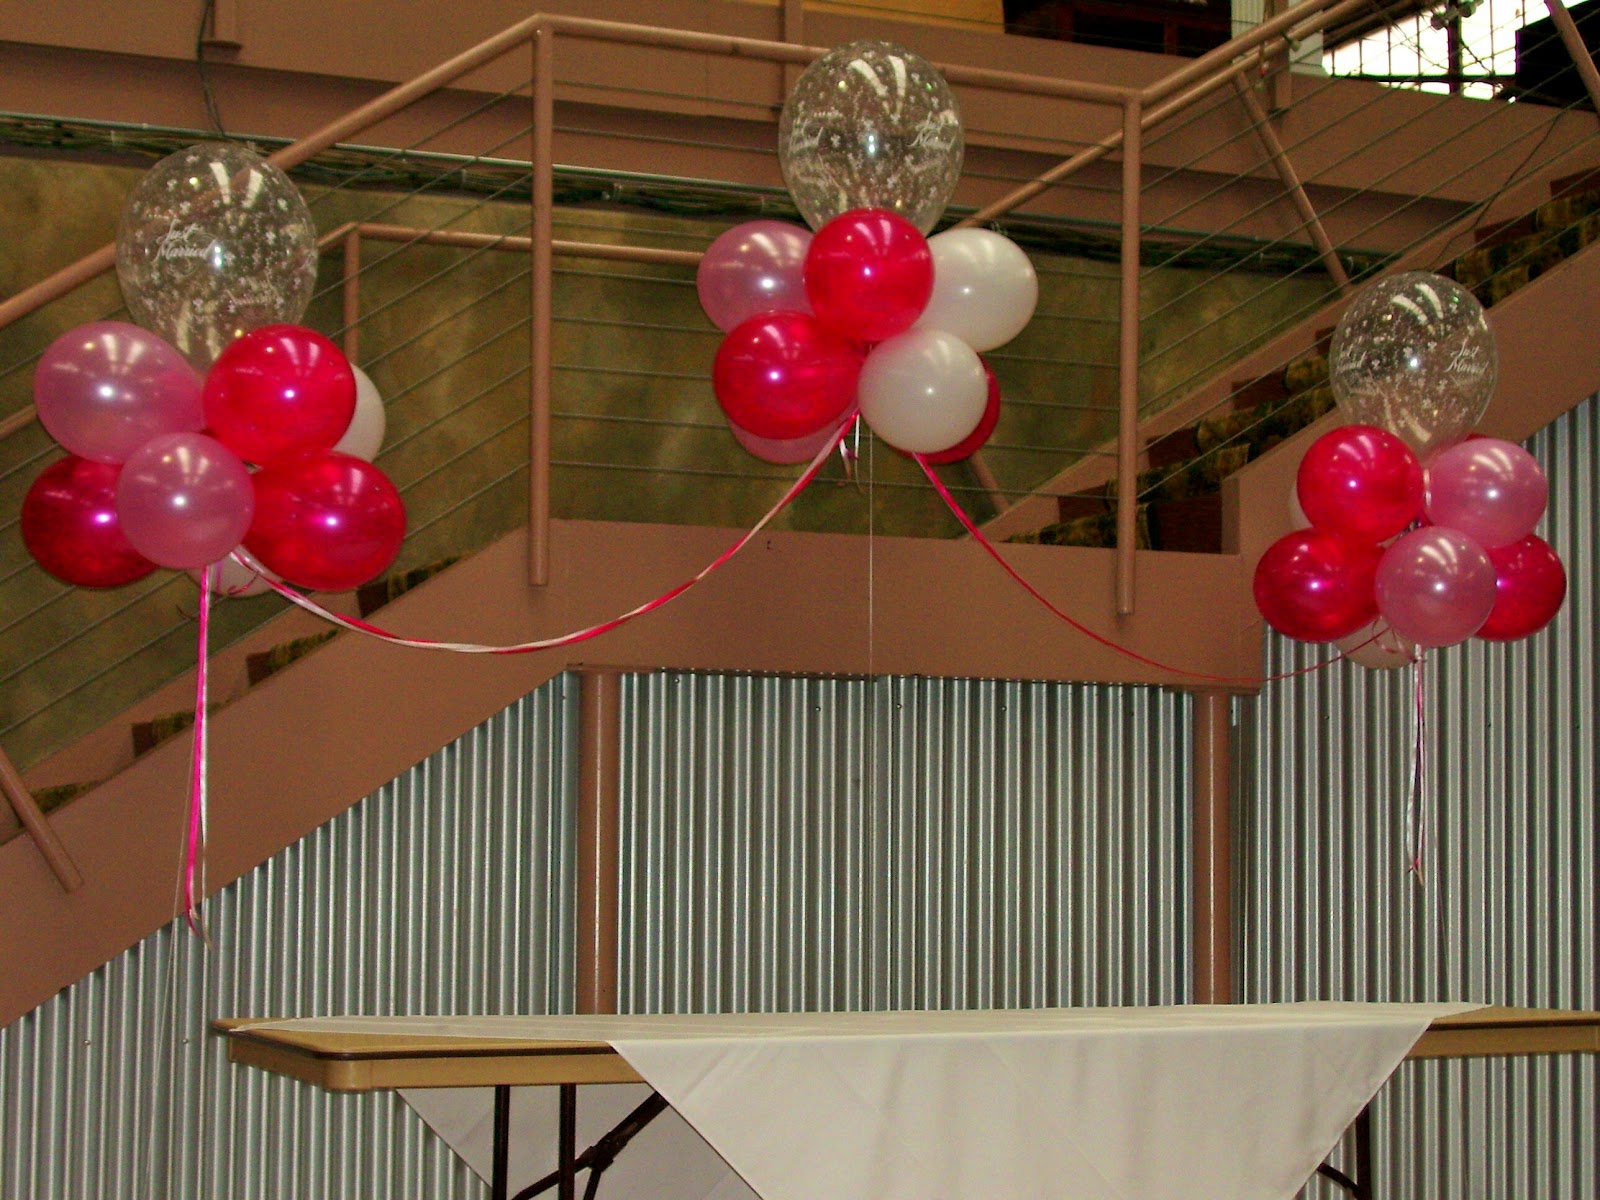 how to make balloon columns instructions